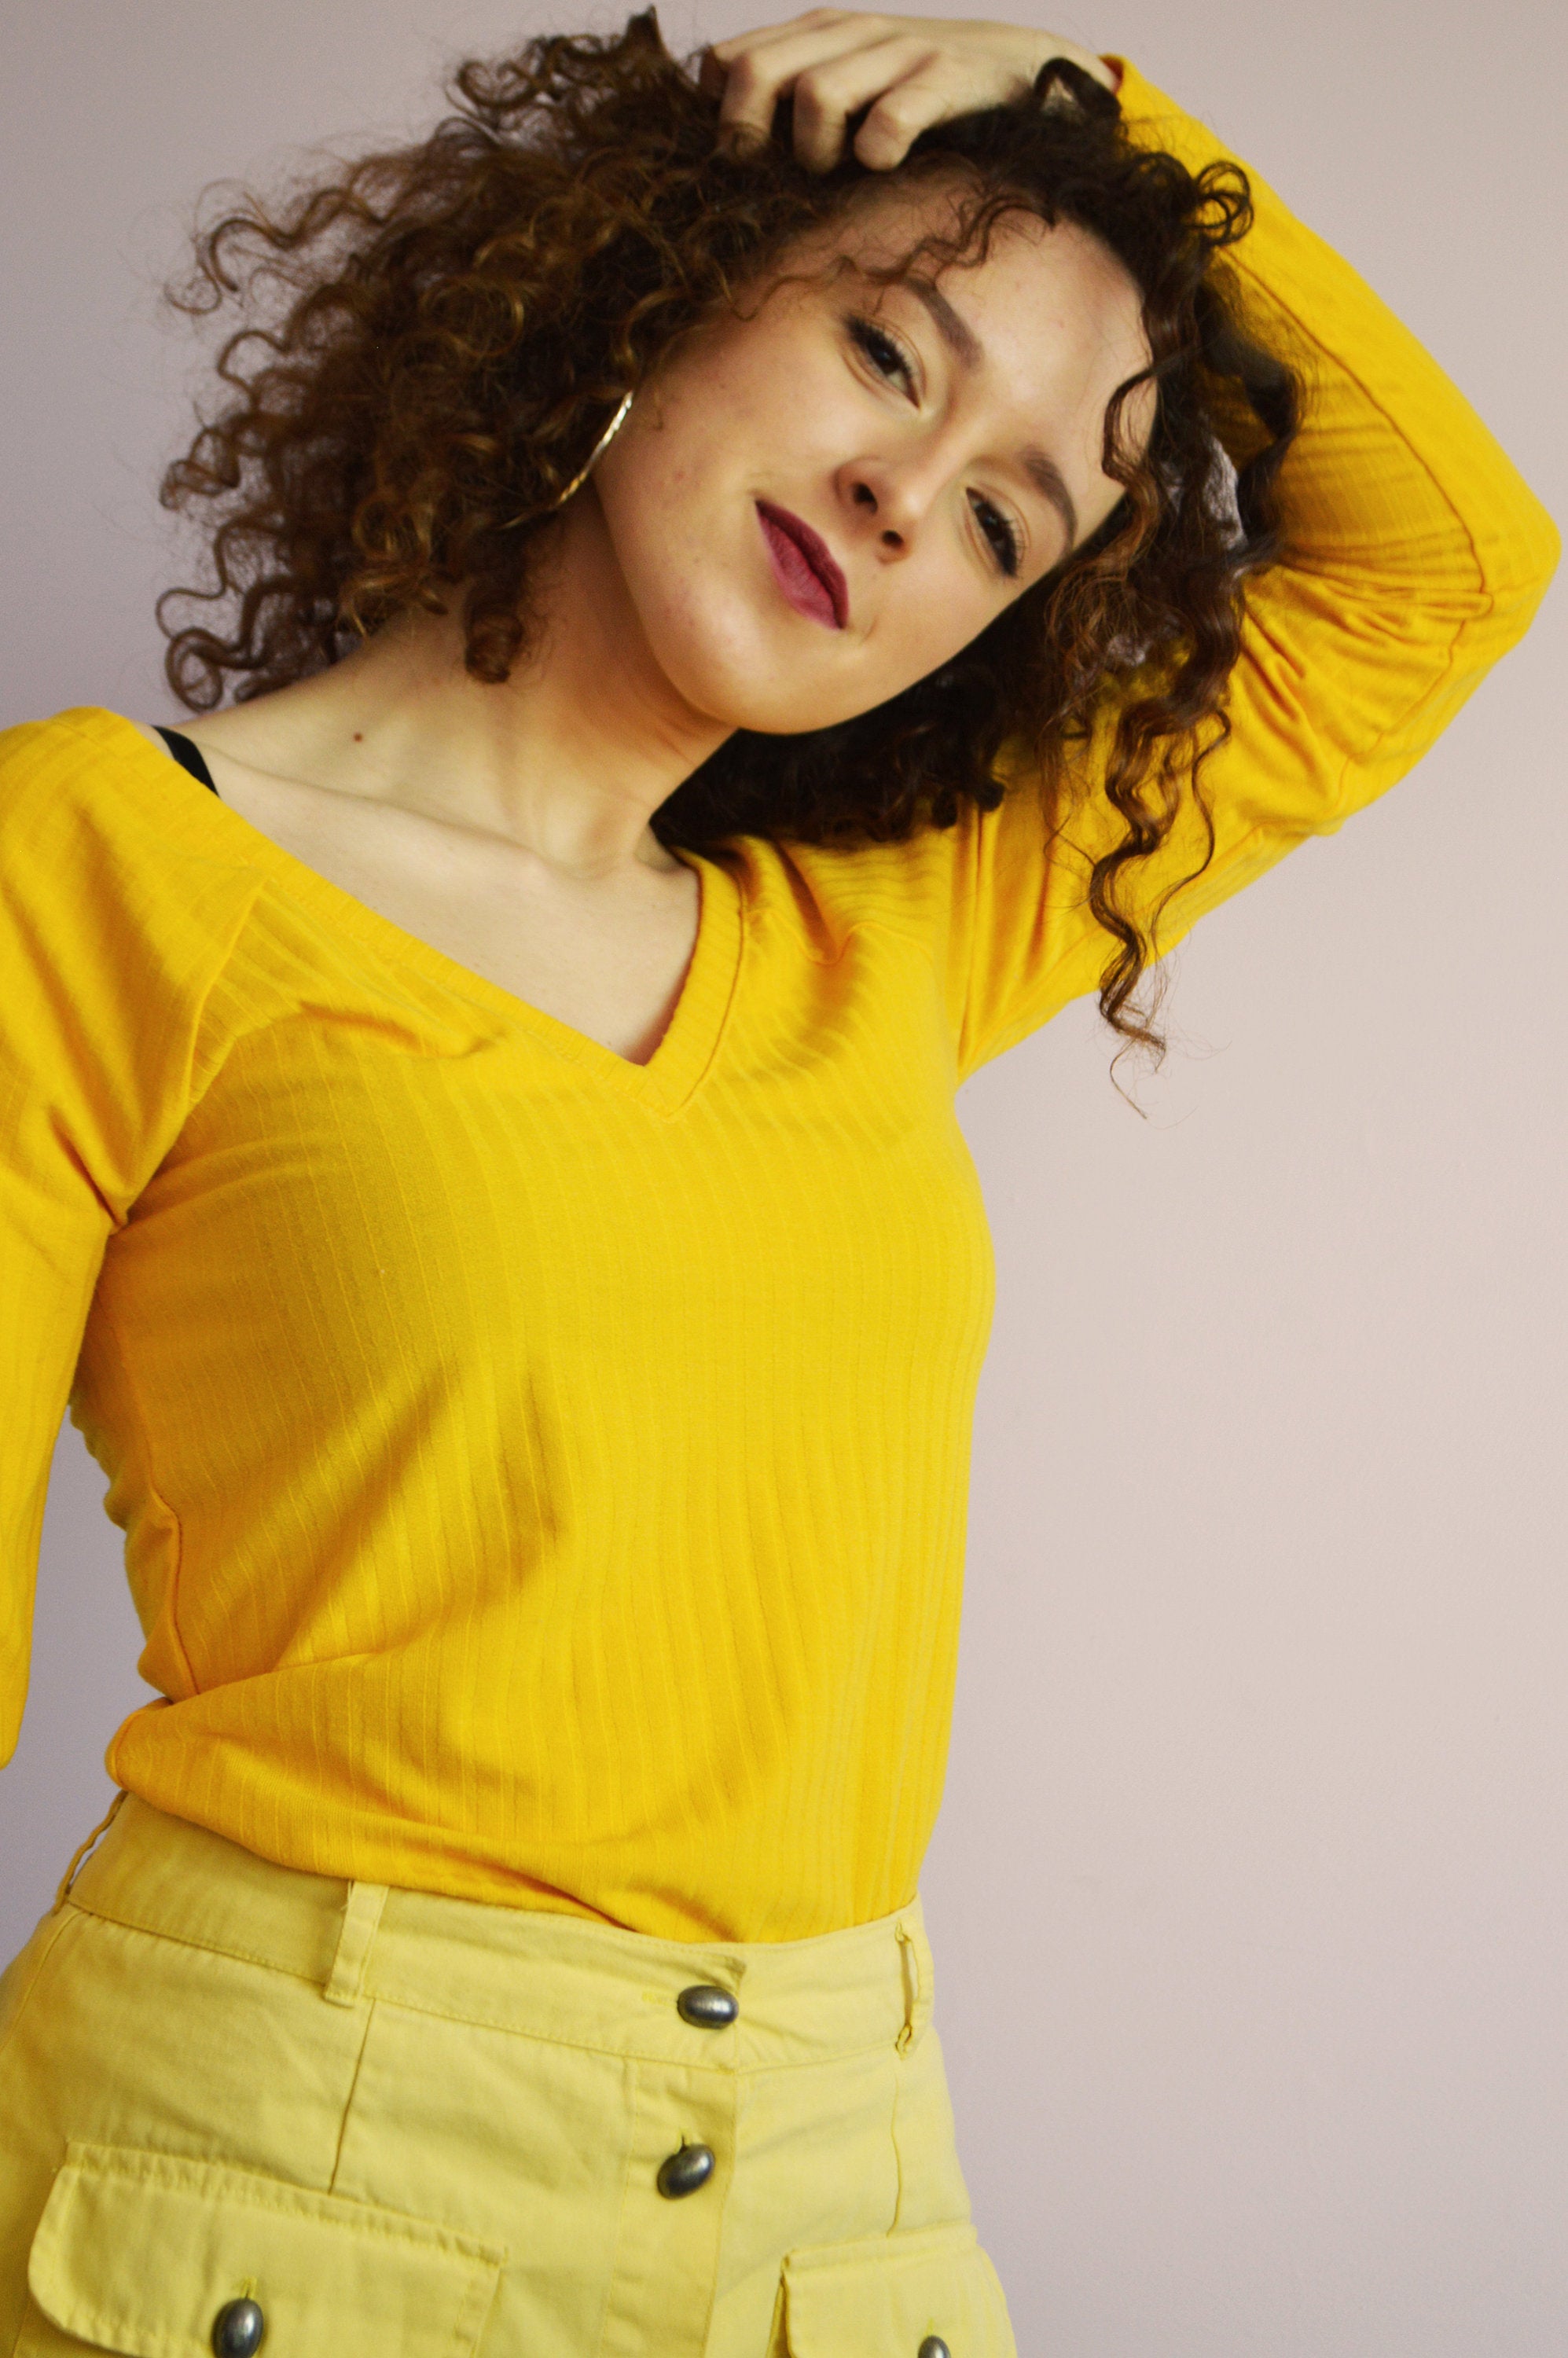 Vintage 90s ribbed knit minimalist yellow top